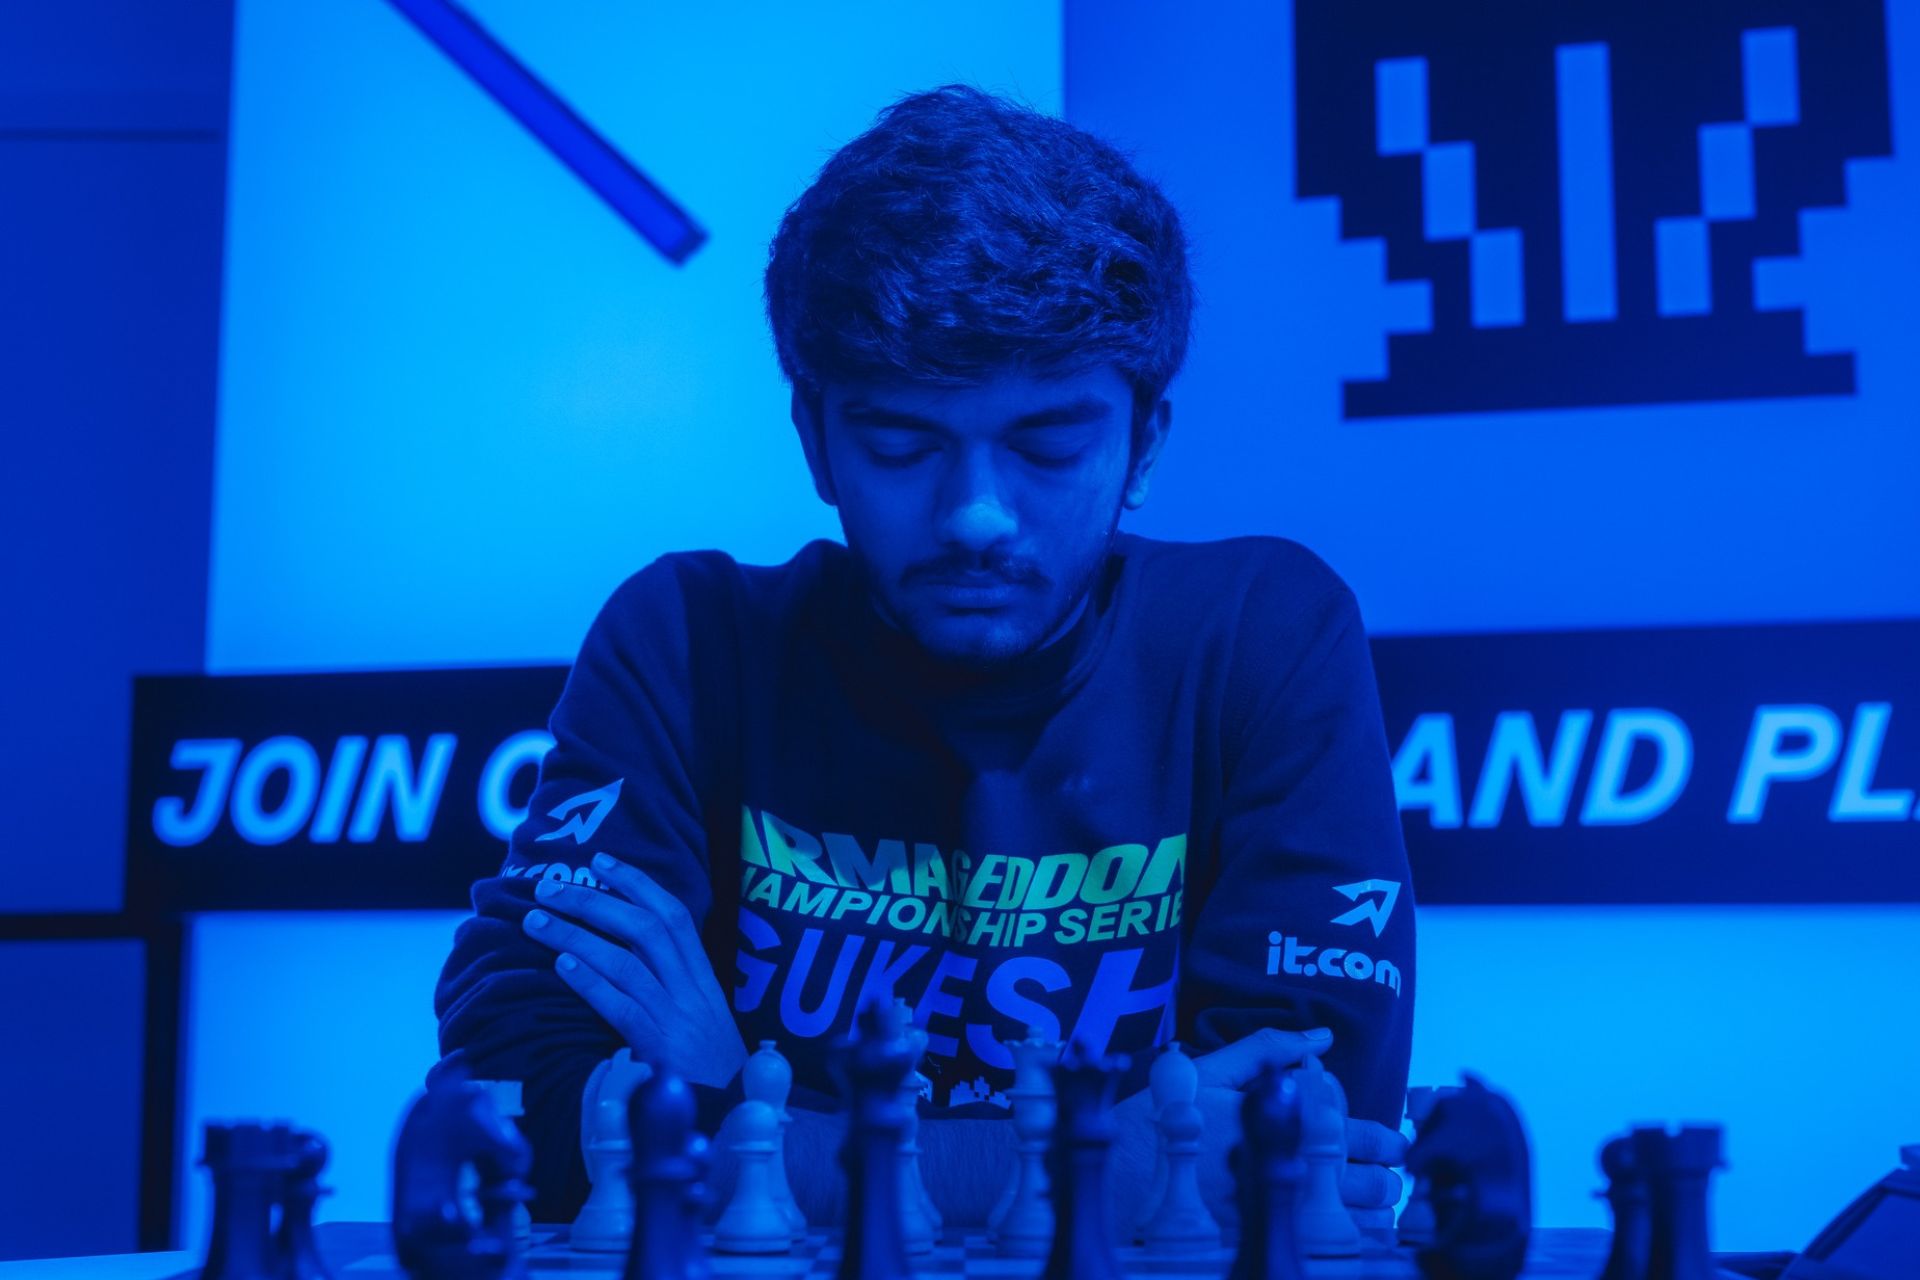 D Gukesh Becomes India's New No. 1 Chess Player